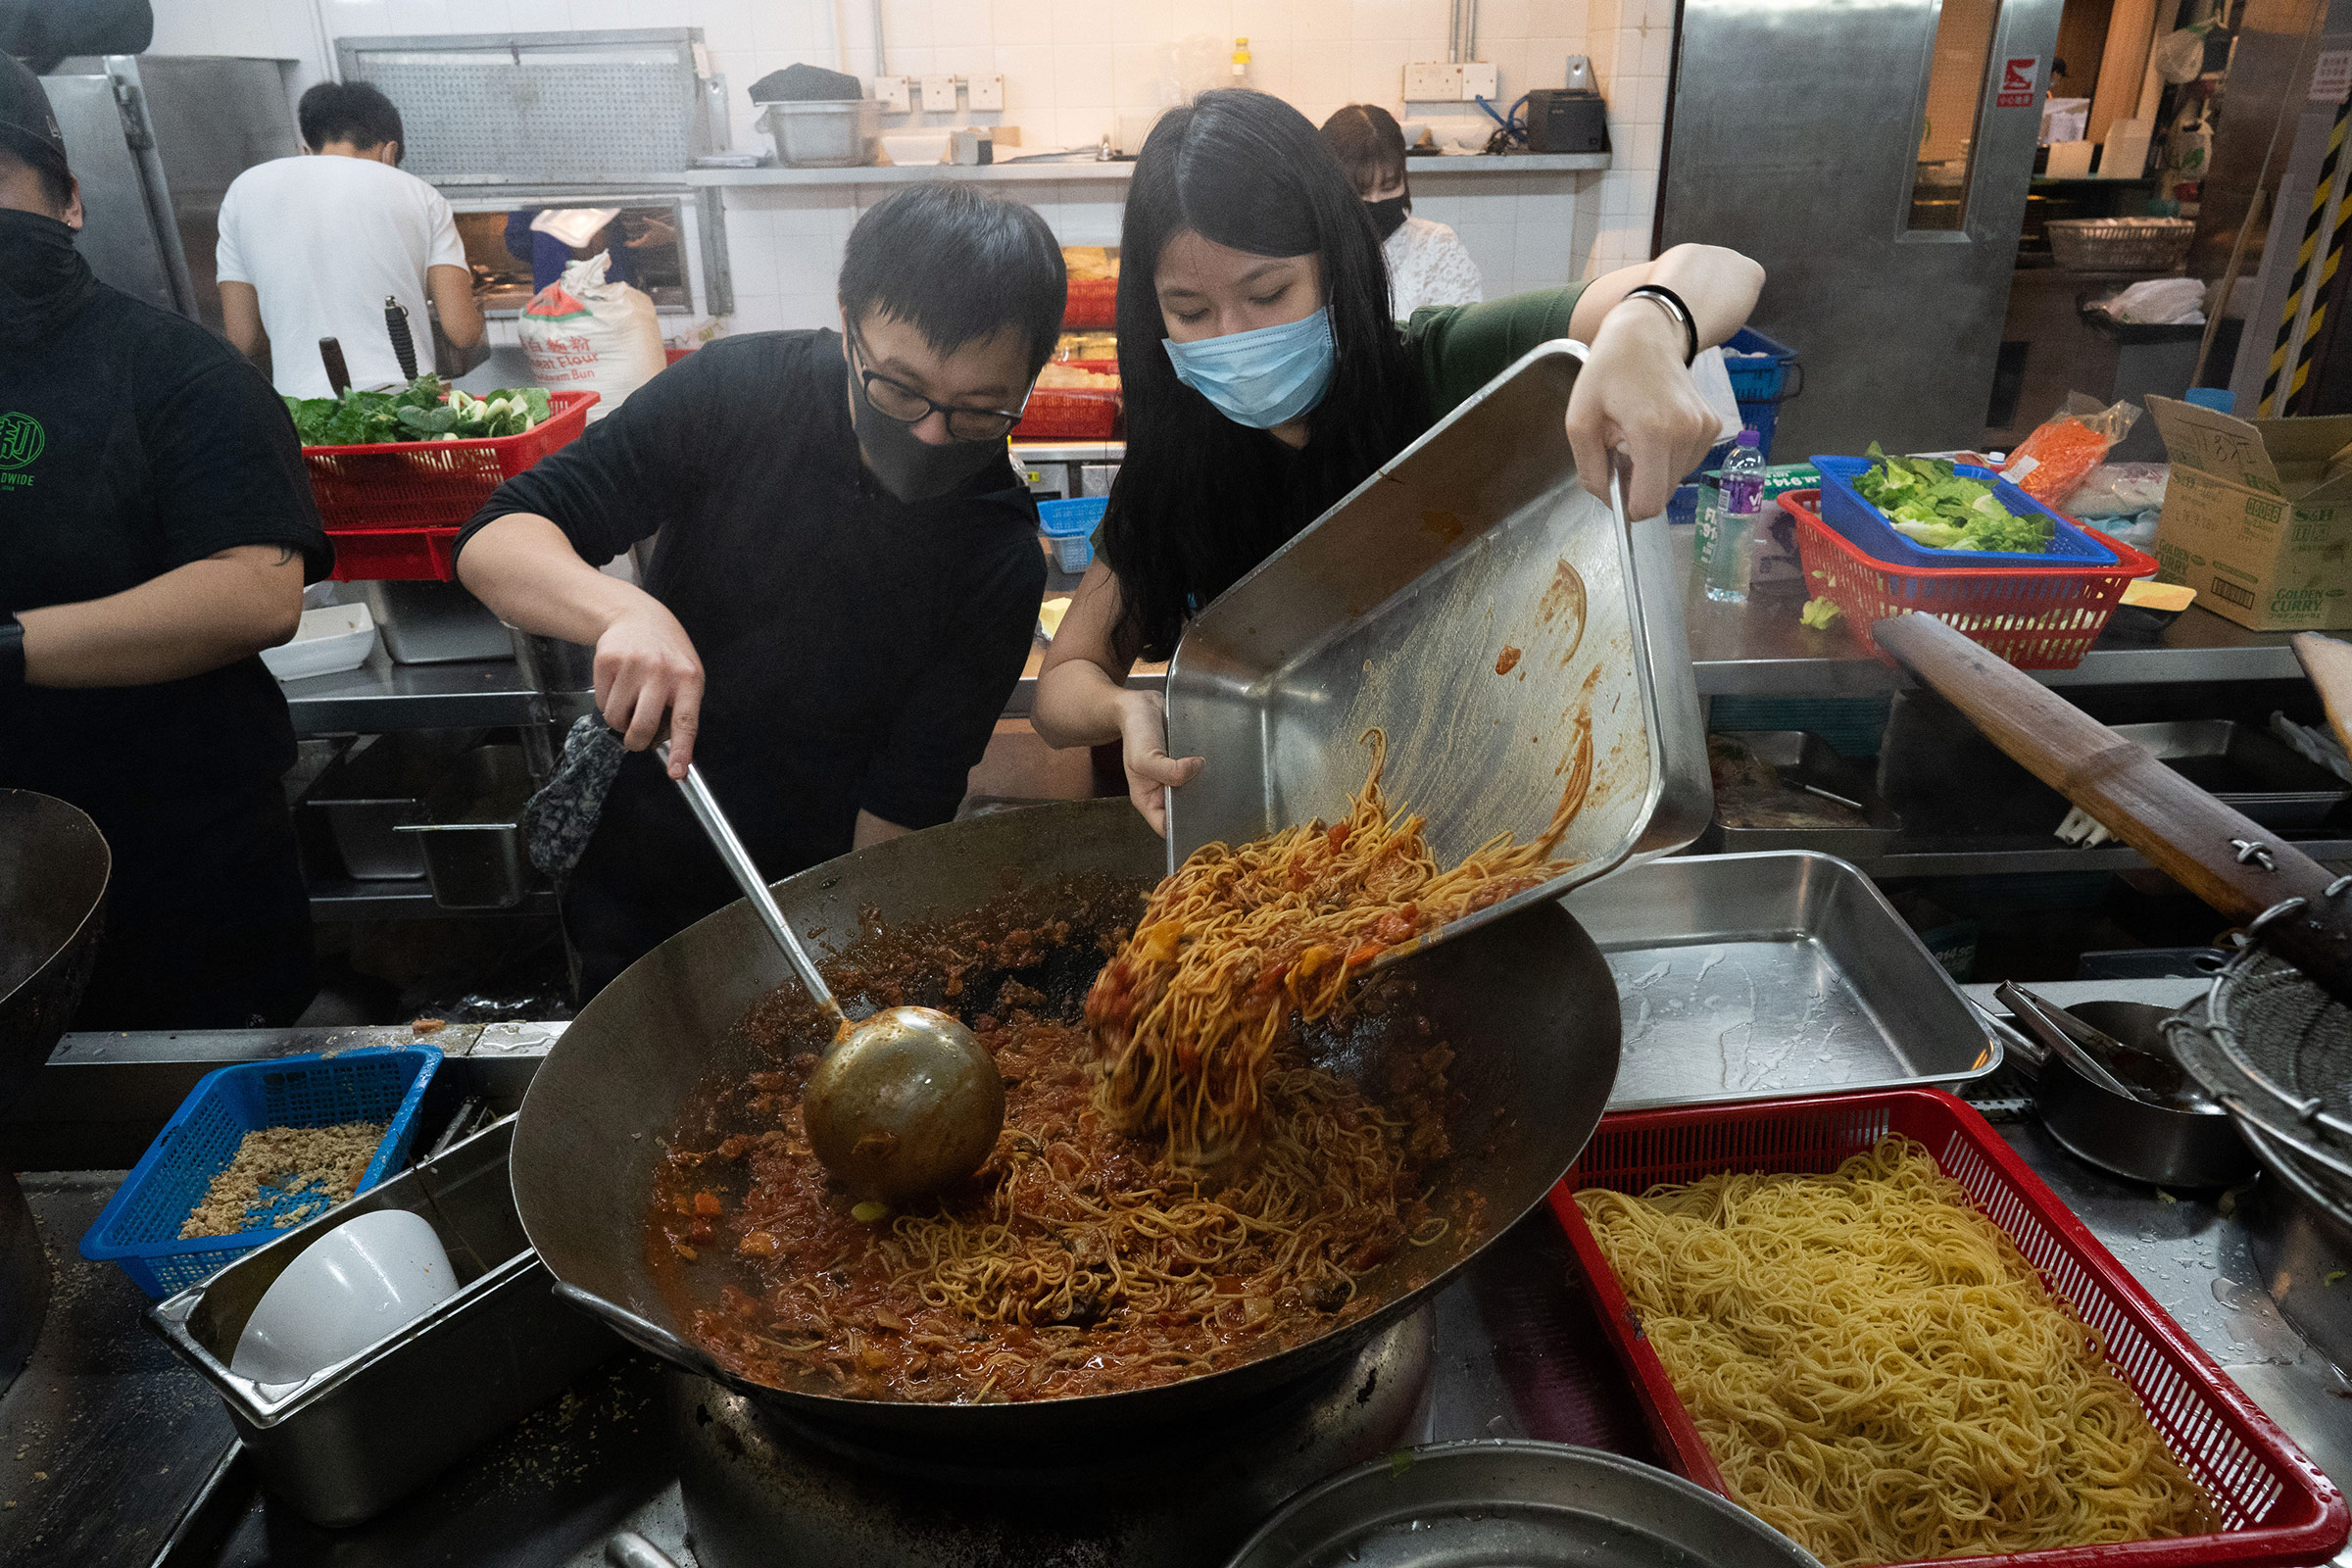 Volunteers, some of whom had never cooked before, help prepare food for the protestors gathered at PolyU, Nov. 14. (Bing Guan)